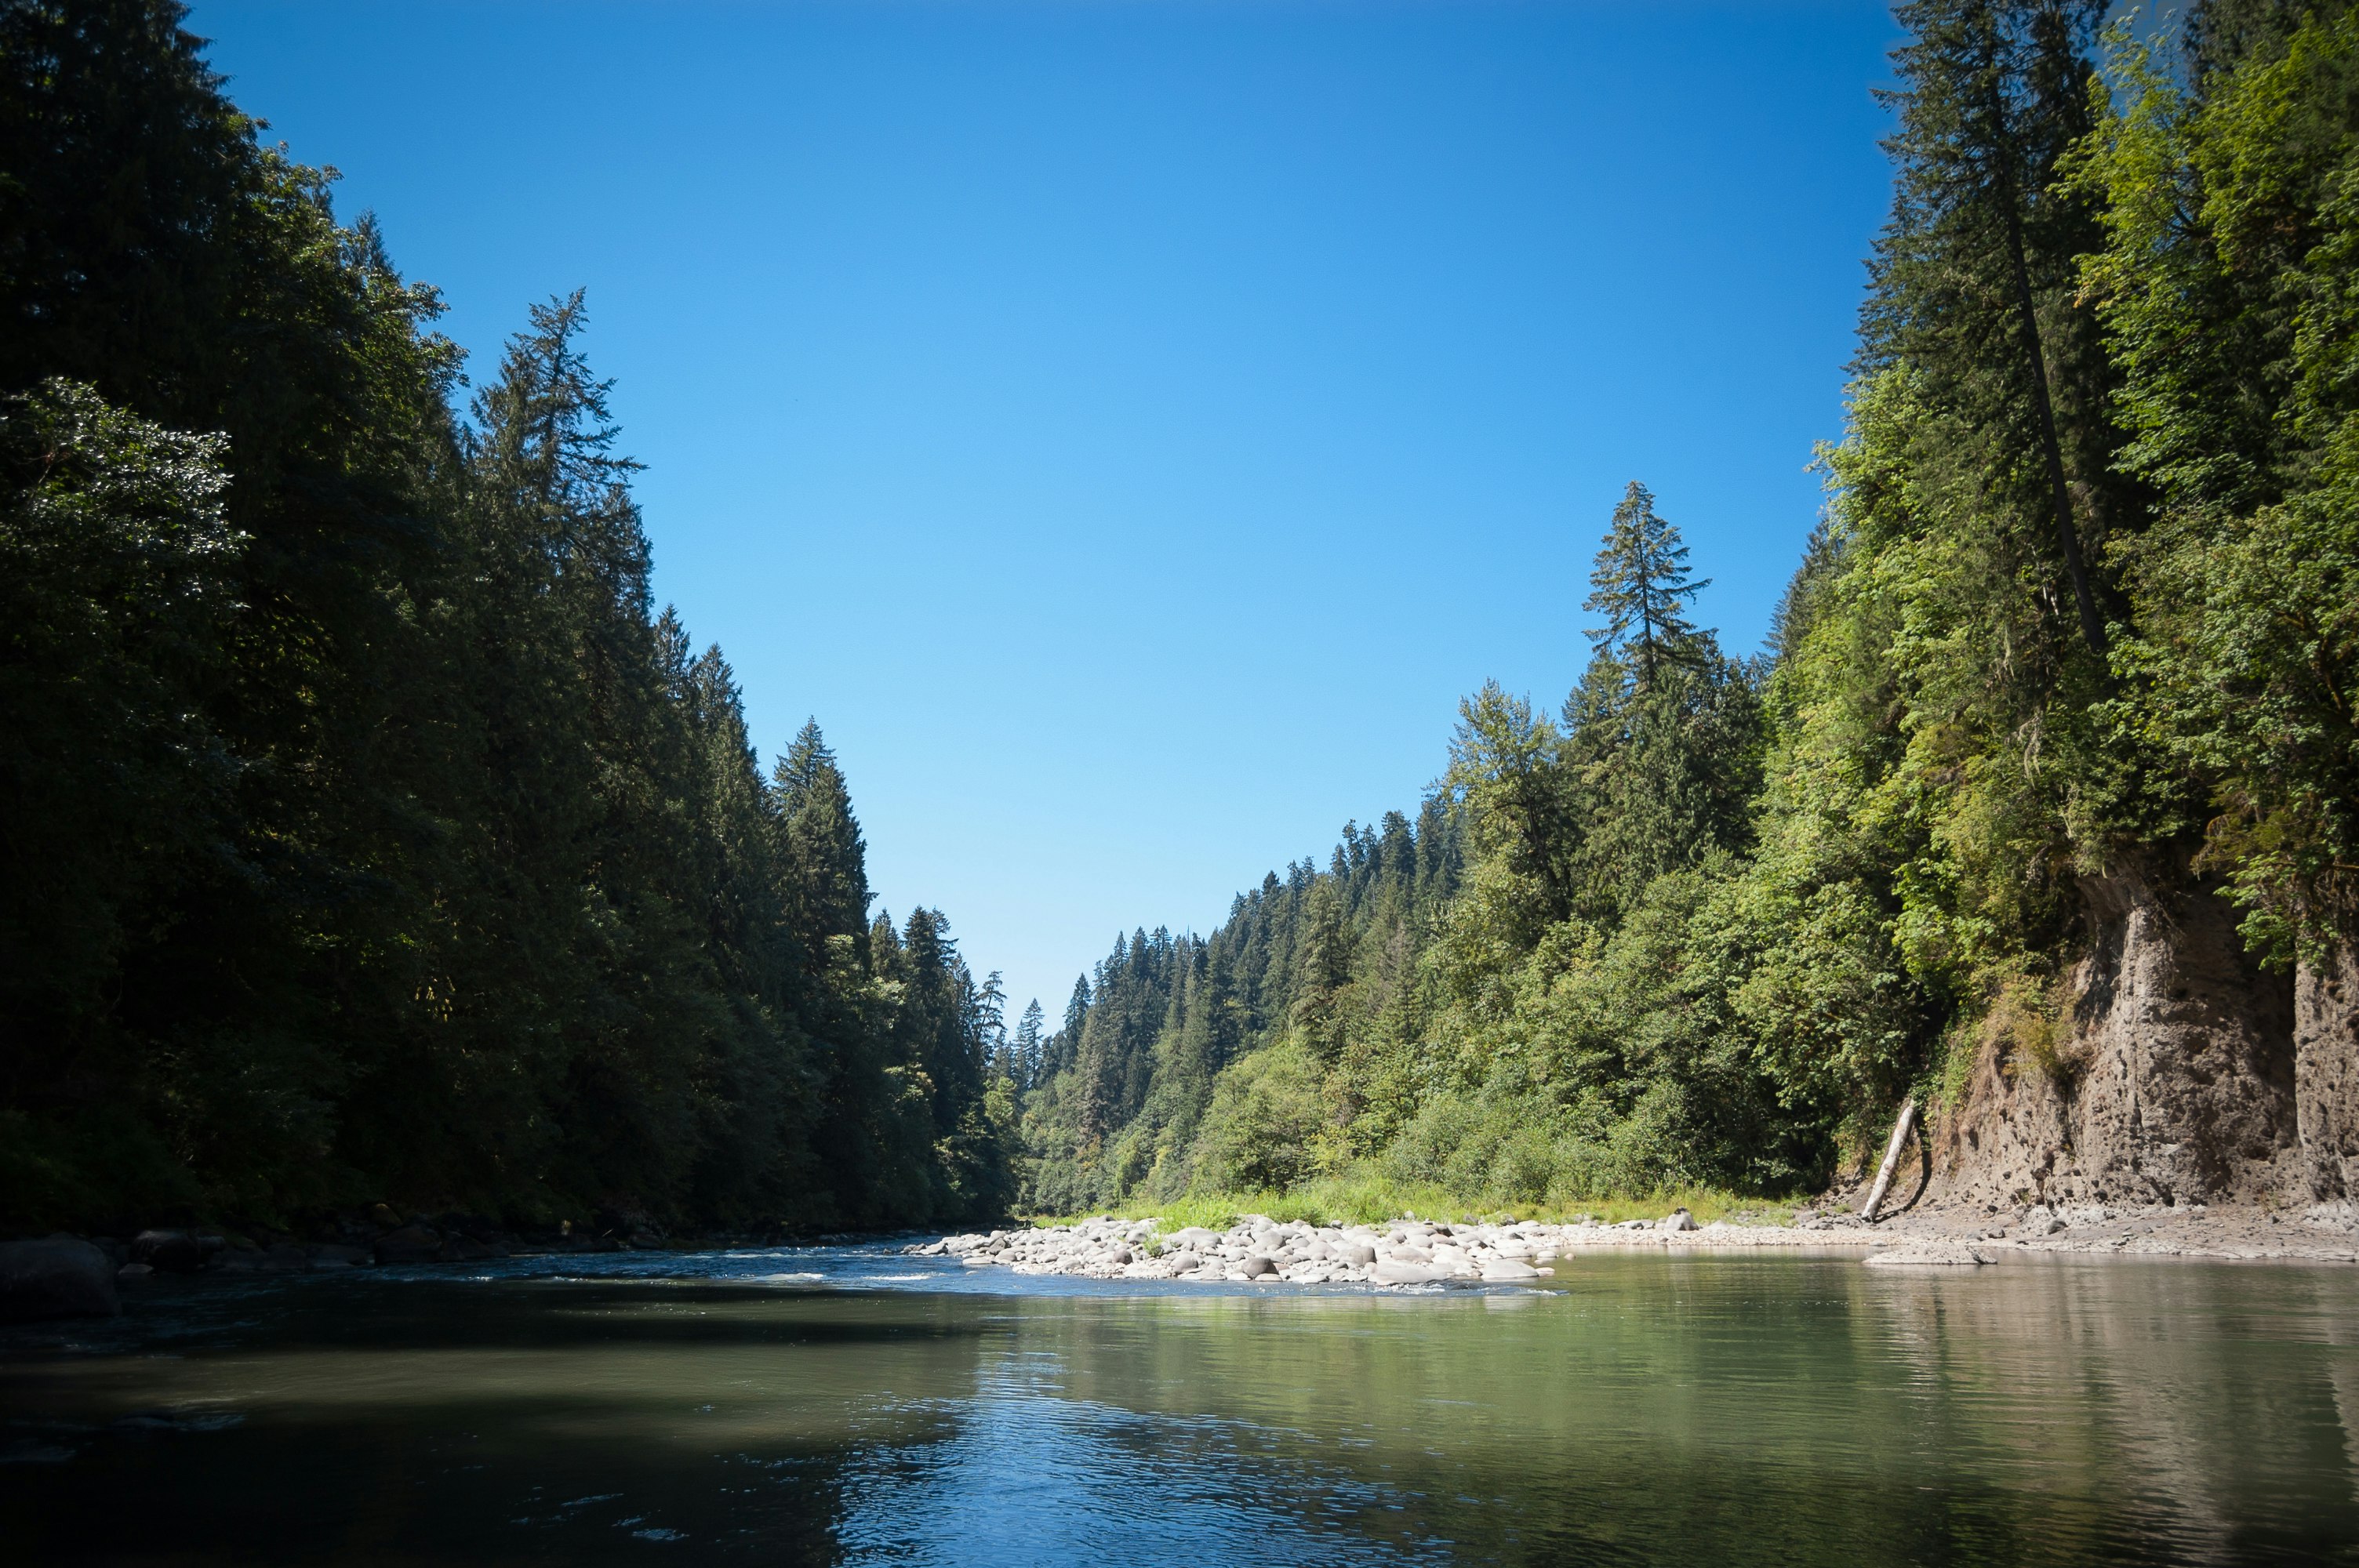 This shot of the Sandy River in Oregon shows the broad green, blue, and black expanse of the river in the foreground extending to a narrow point in the distance. The river is edged by thick stands of tall evergreen trees. In the midground is a pile of grey river rocks.